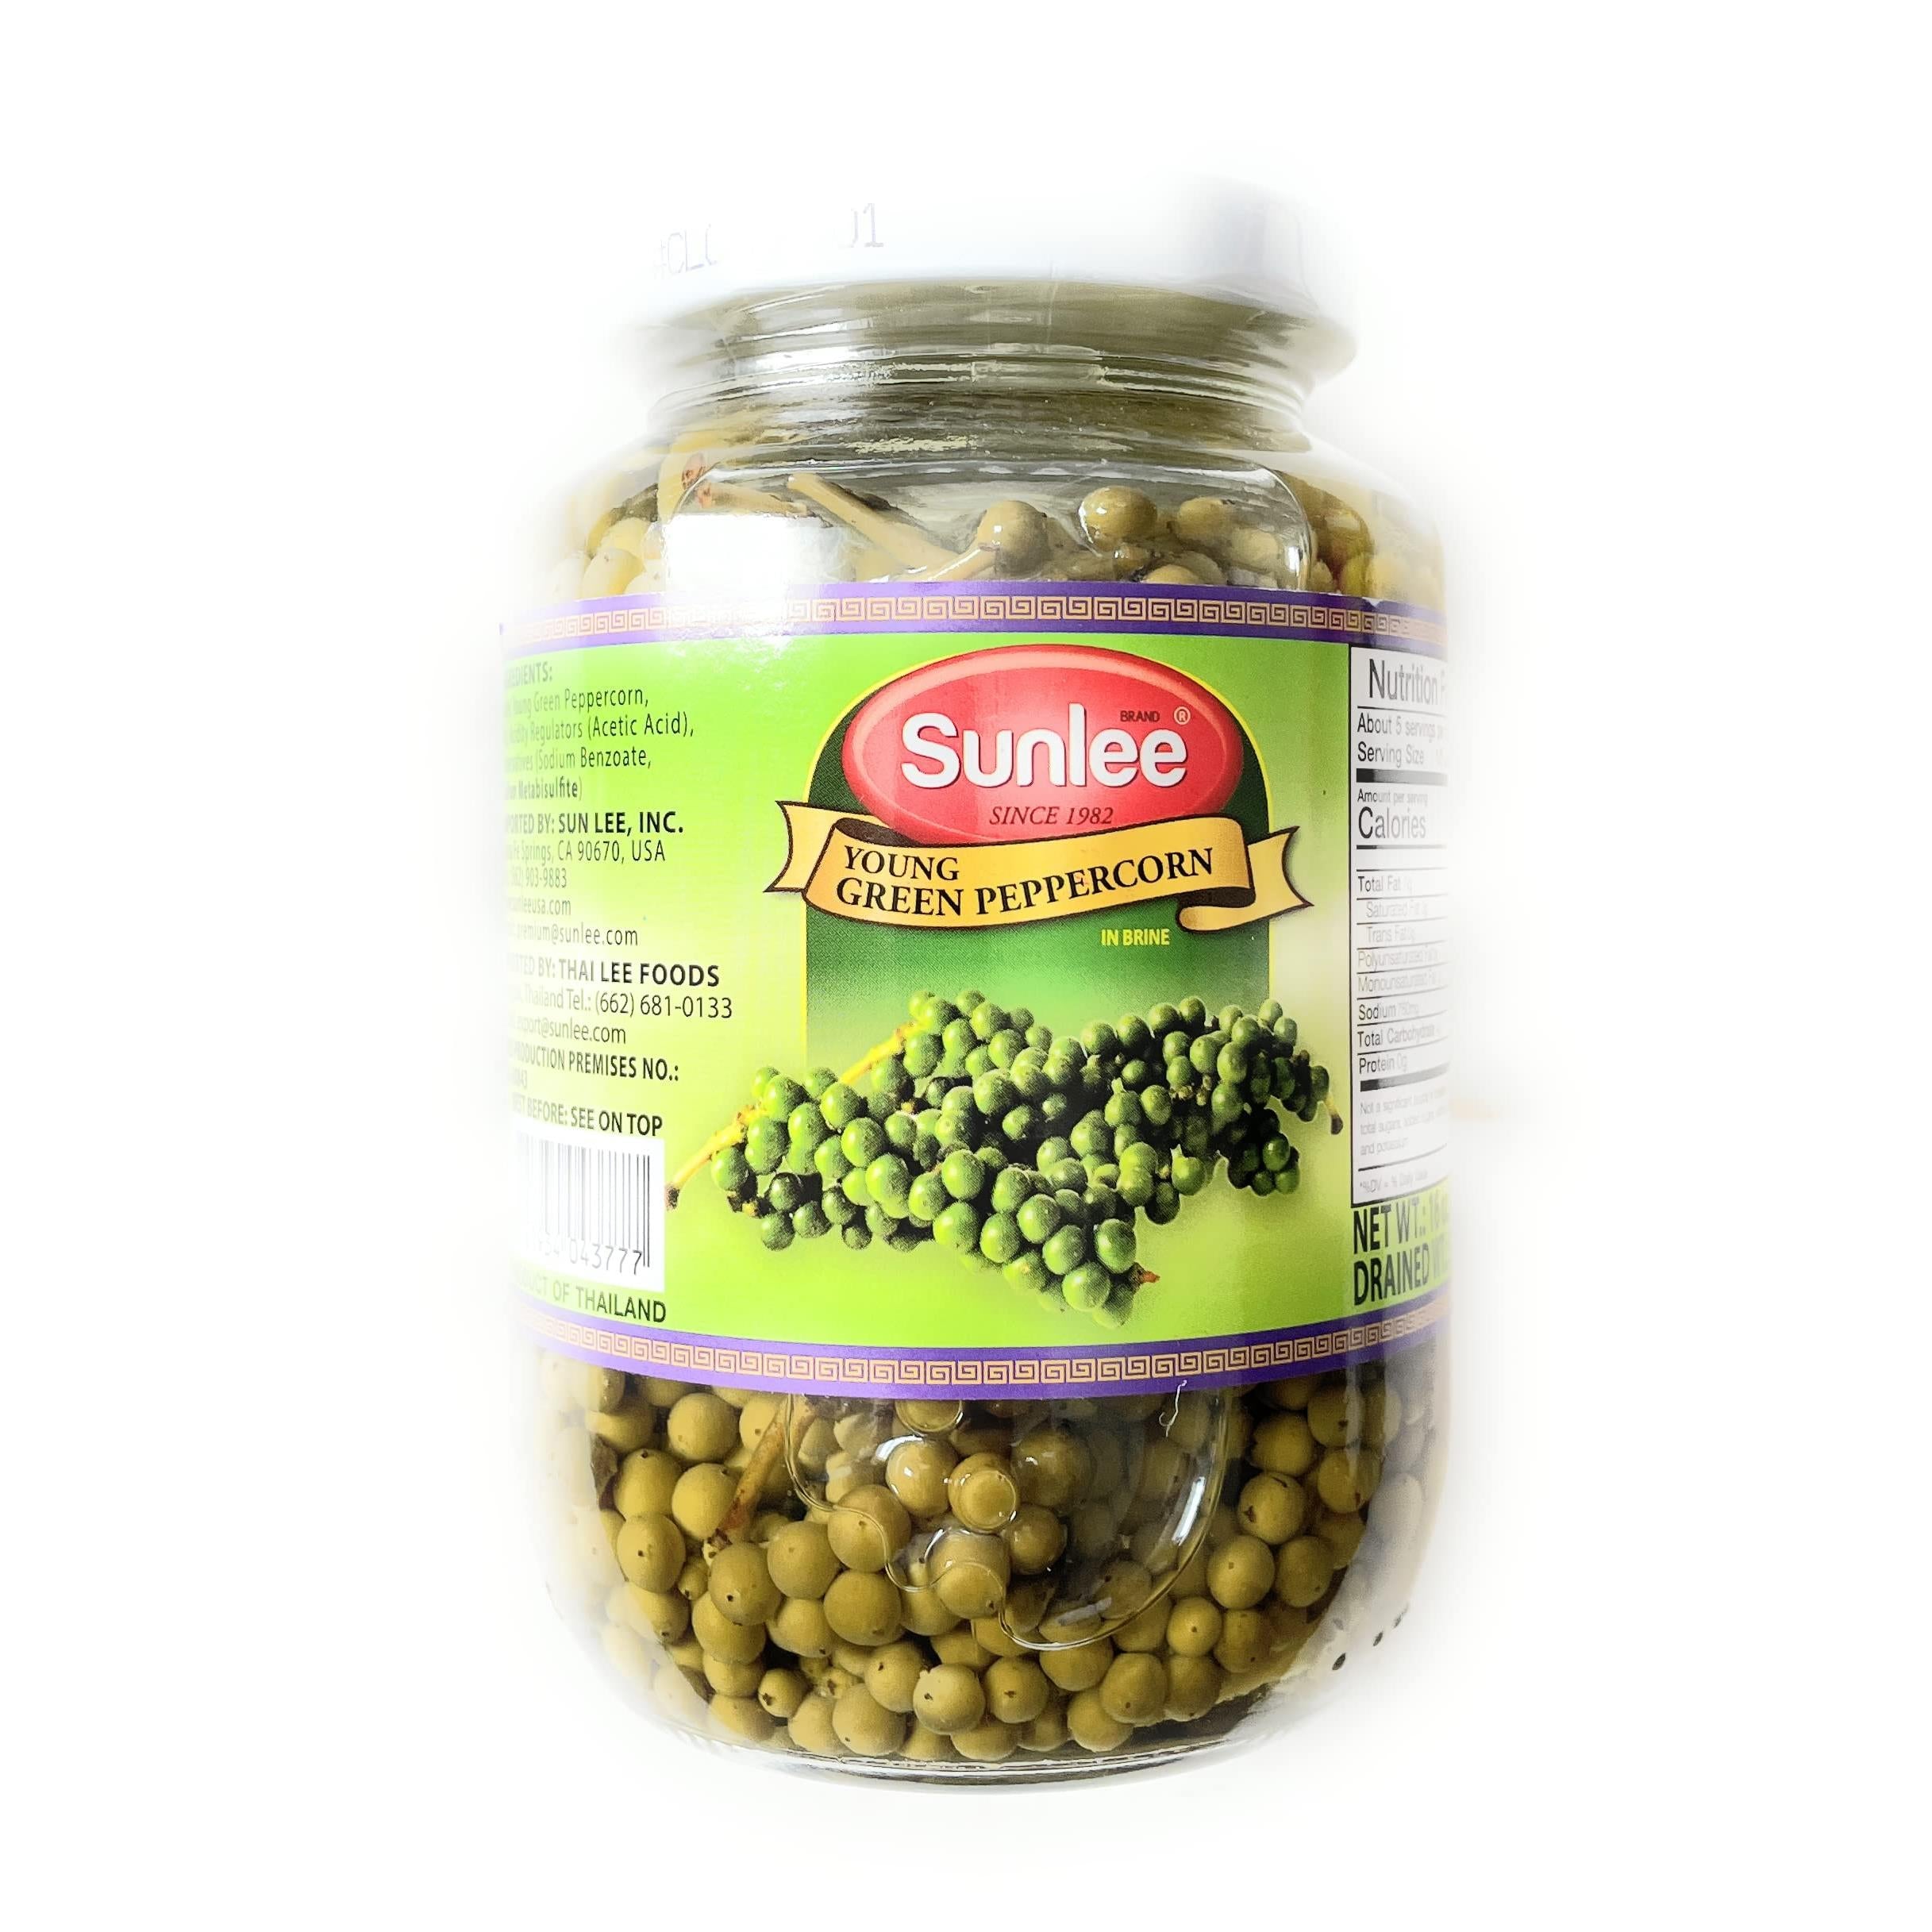 Sunlee Young Green Peppercorn in Brine 16 oz, Pack of 1